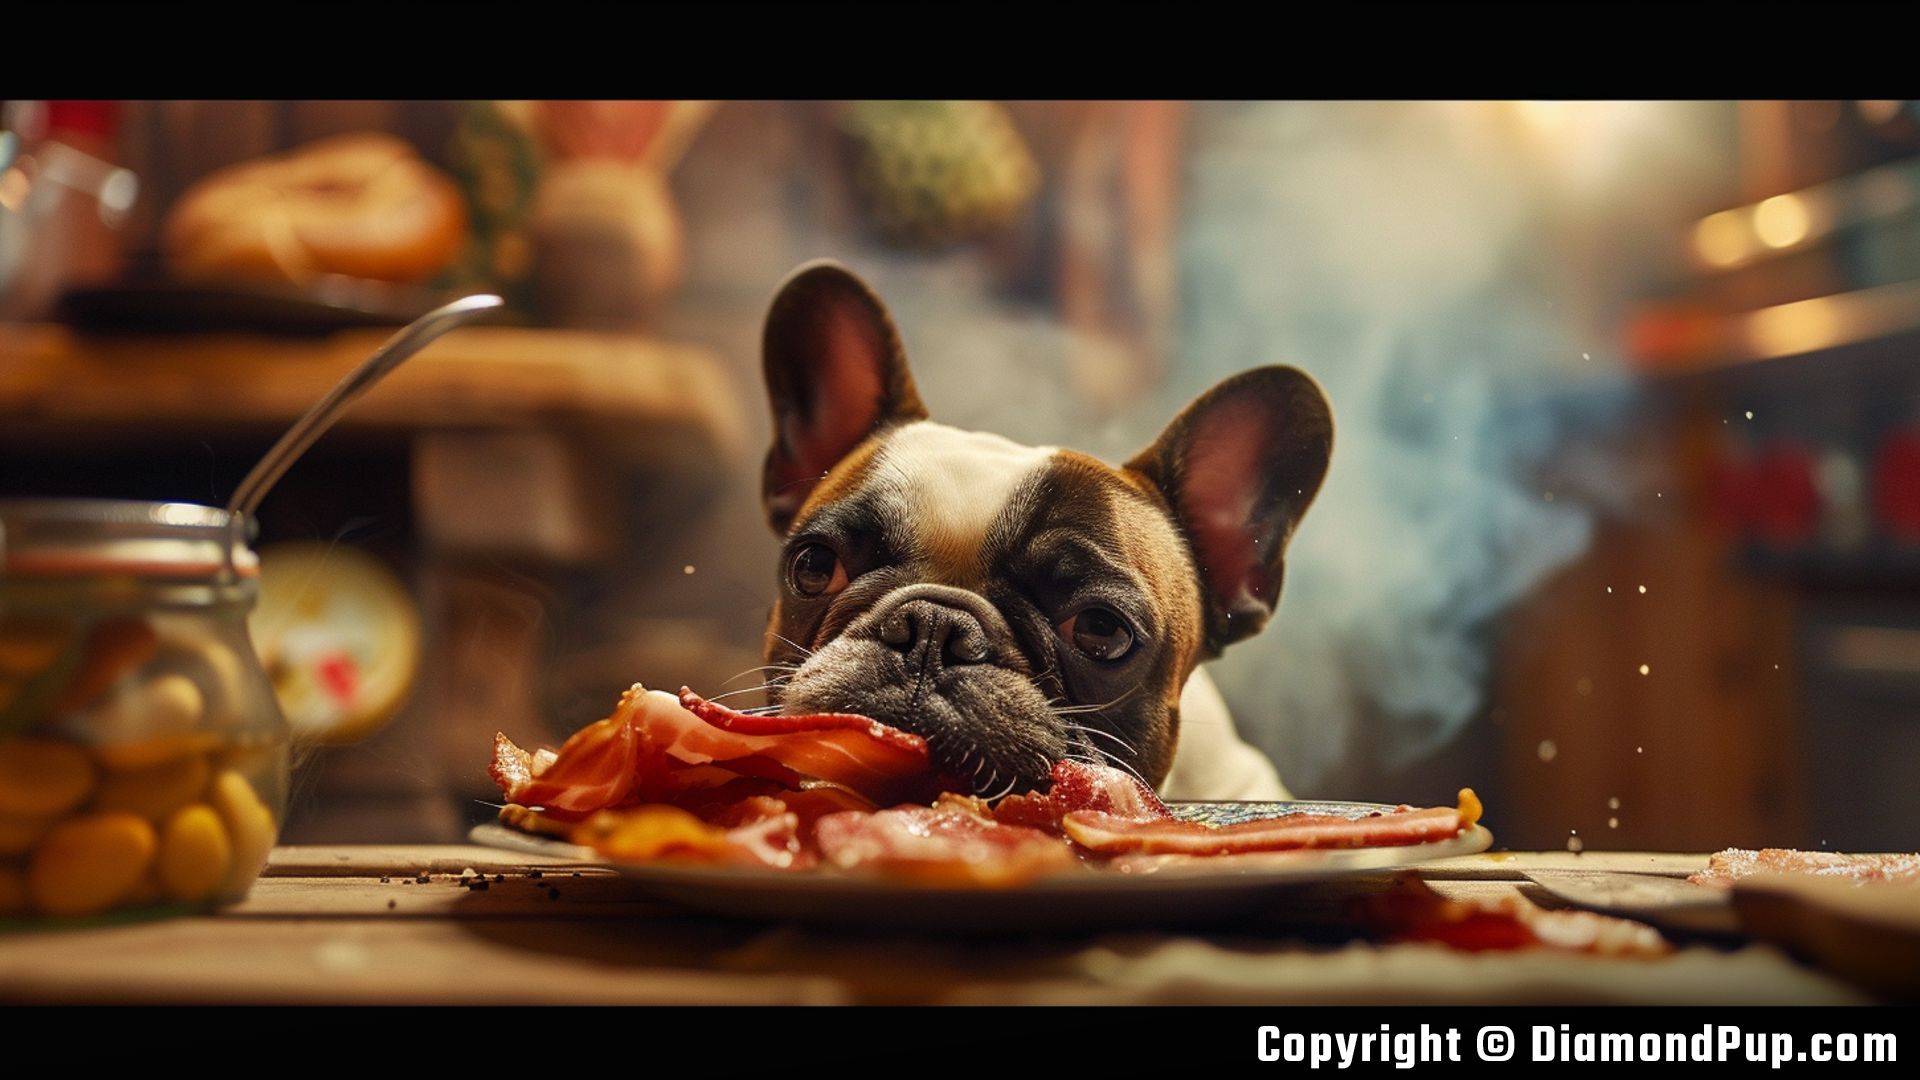 Photograph of a Playful French Bulldog Eating Bacon